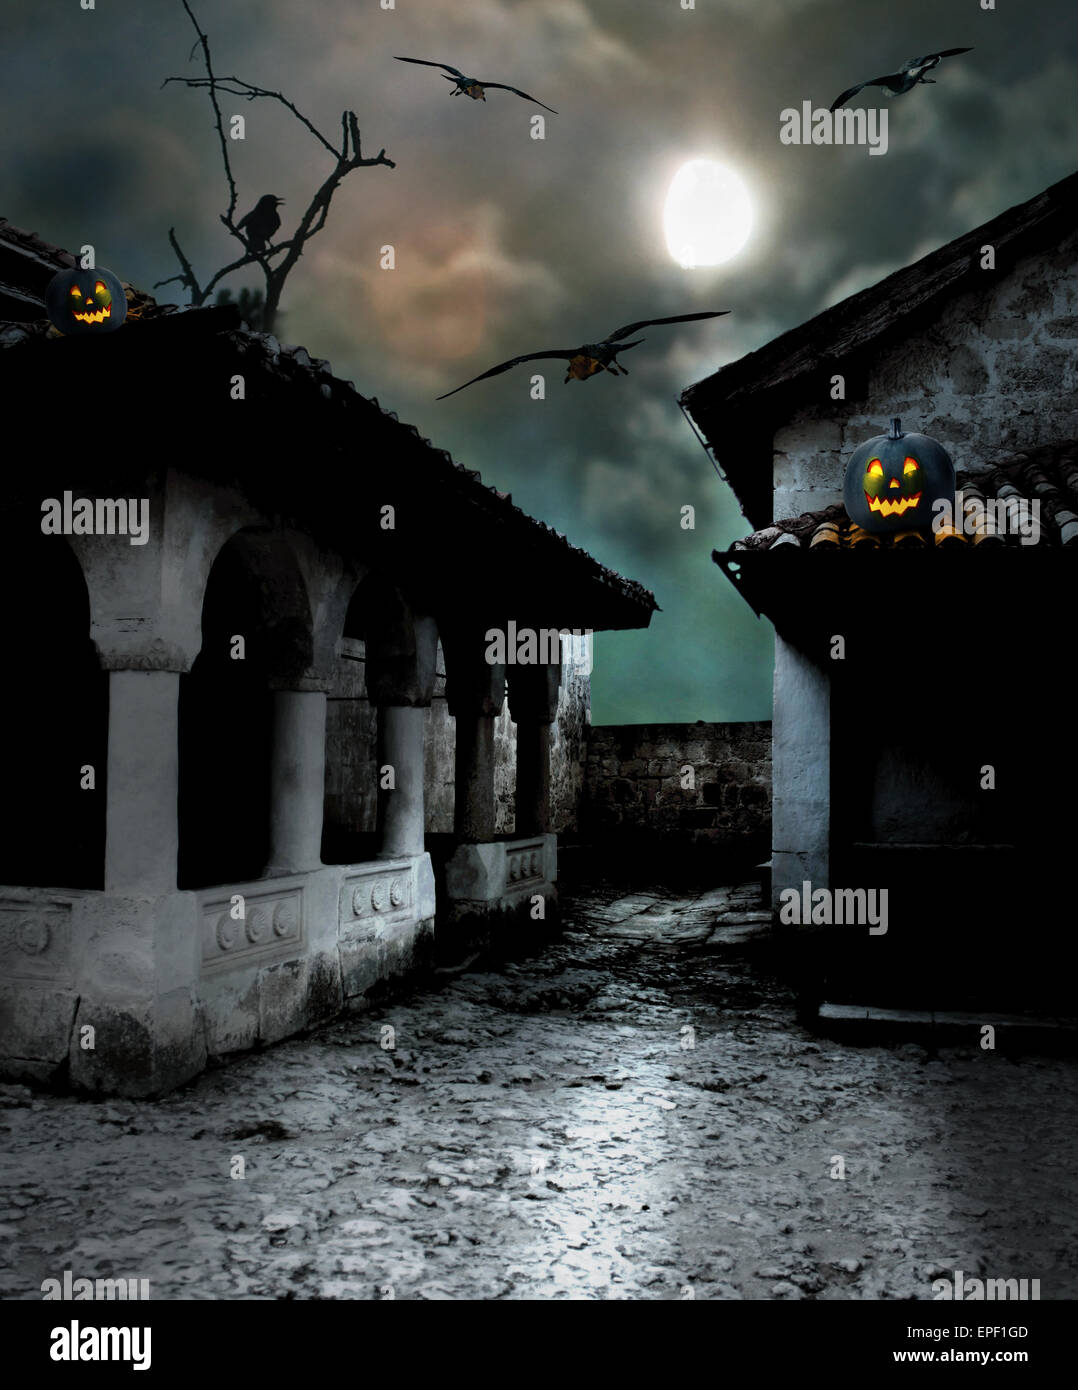 Halloween pumpkins in the yard of an old house at night in the bright moonlight Stock Photo